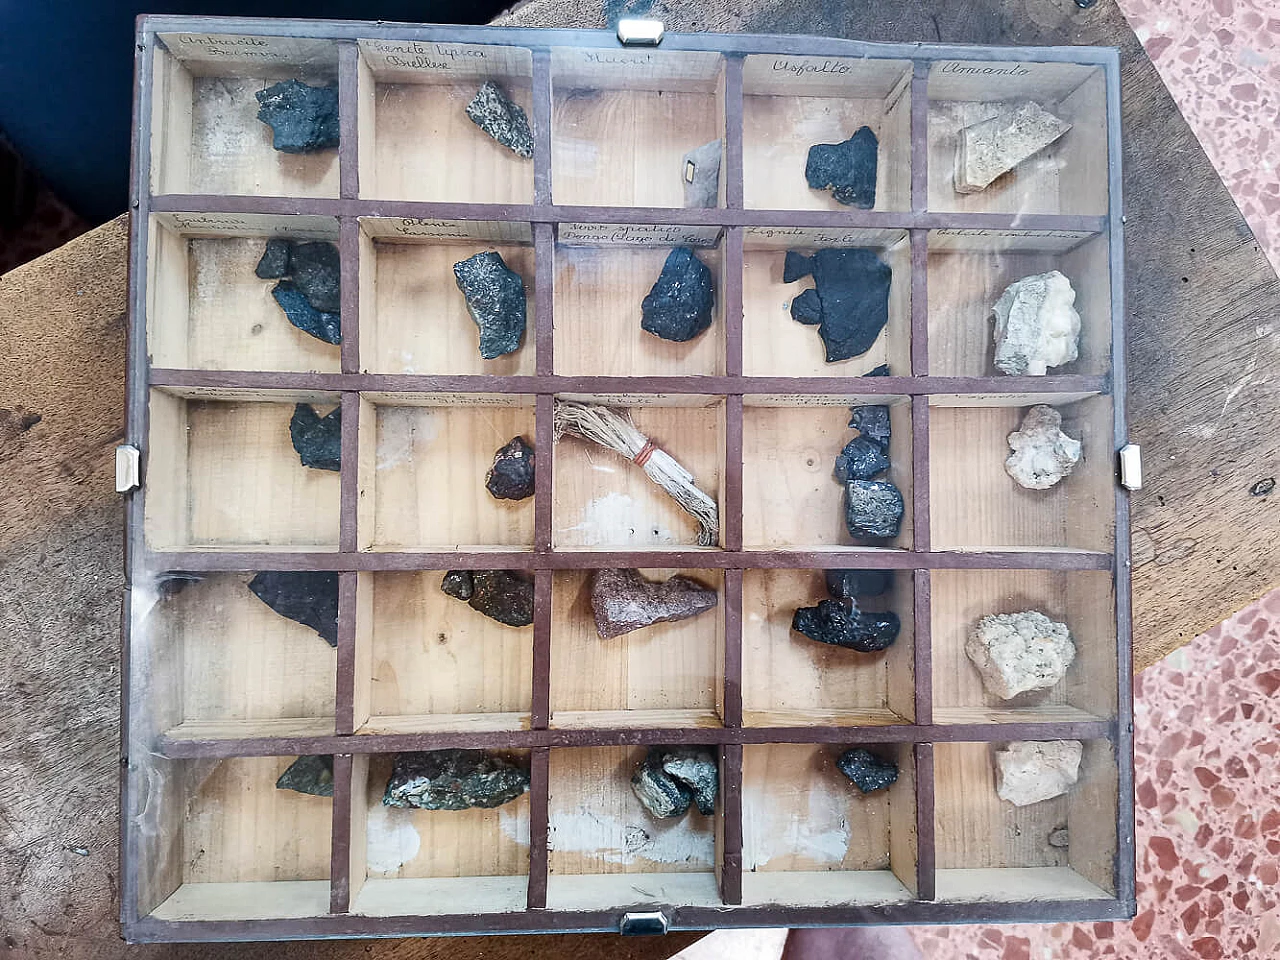 4 School display cabinets with minerals, early 20th century 6